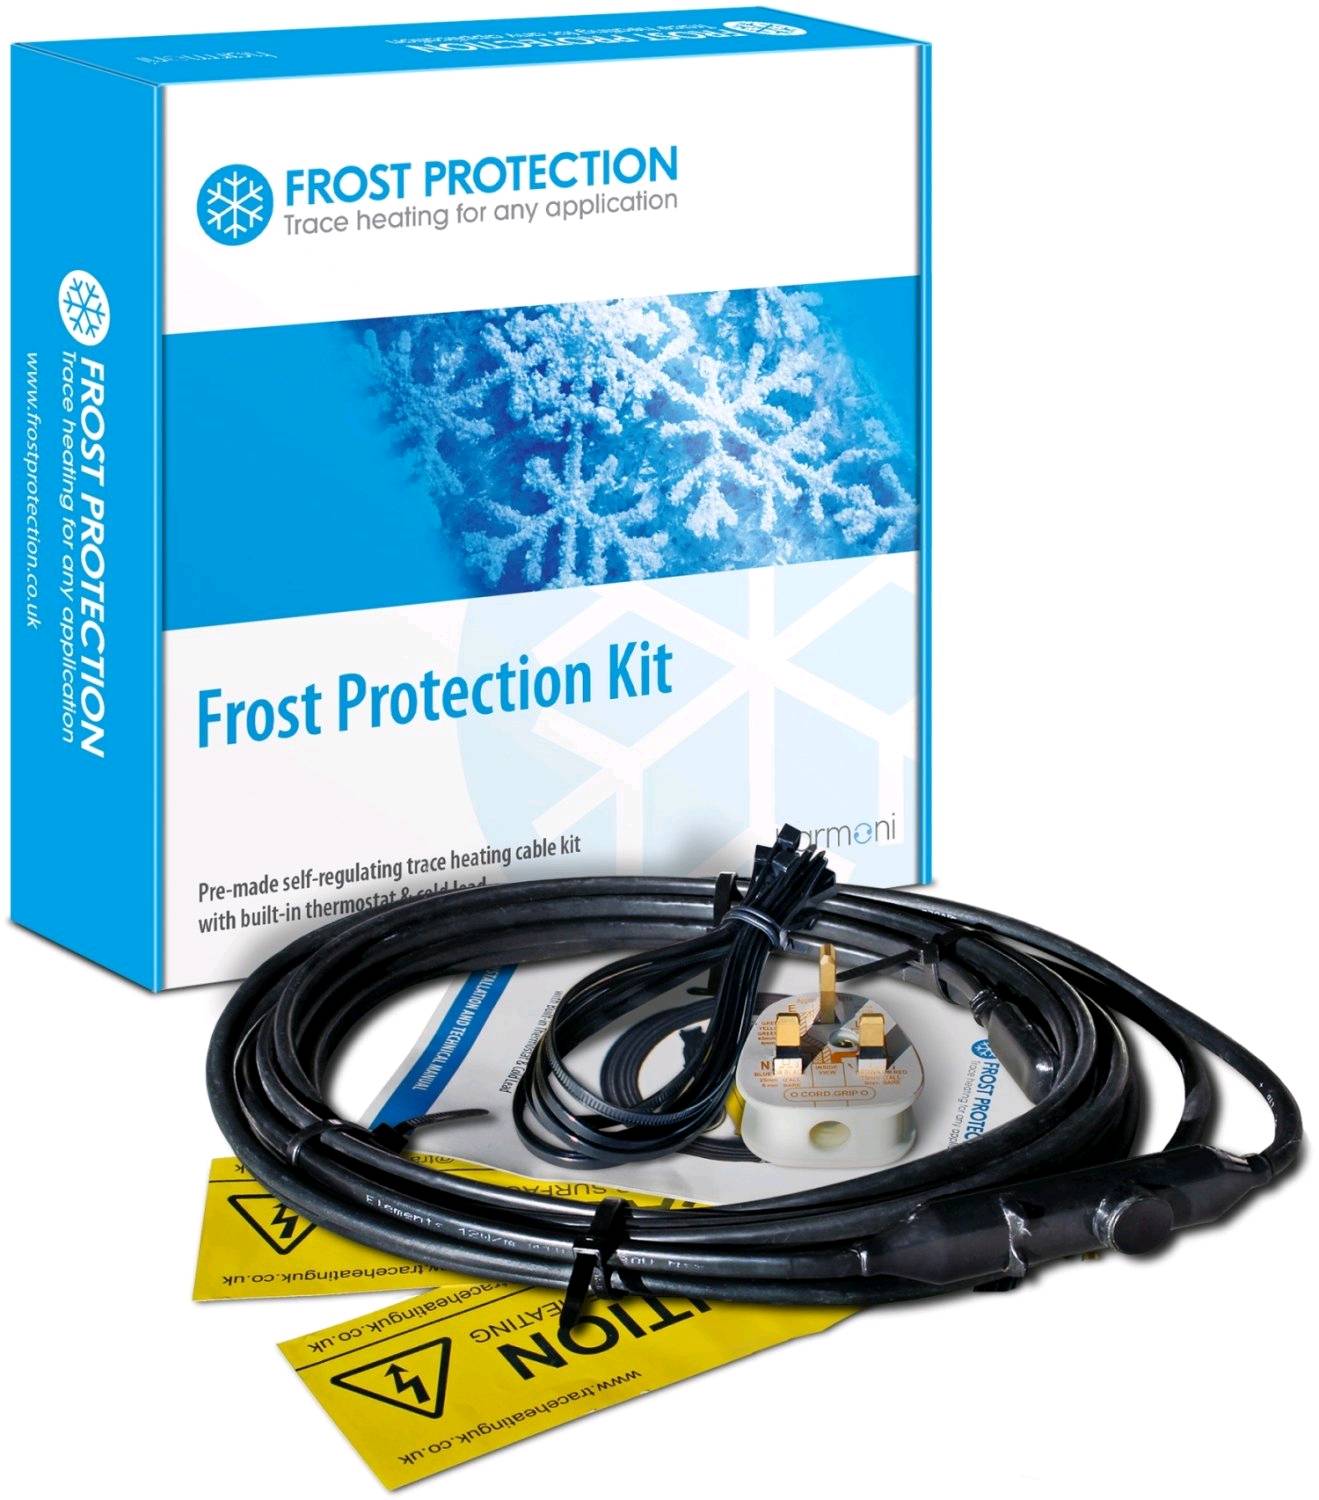 25m Pre-Made (12W L/m) Frost Protection Trace Heating Kit with Thermostat Heater Tape